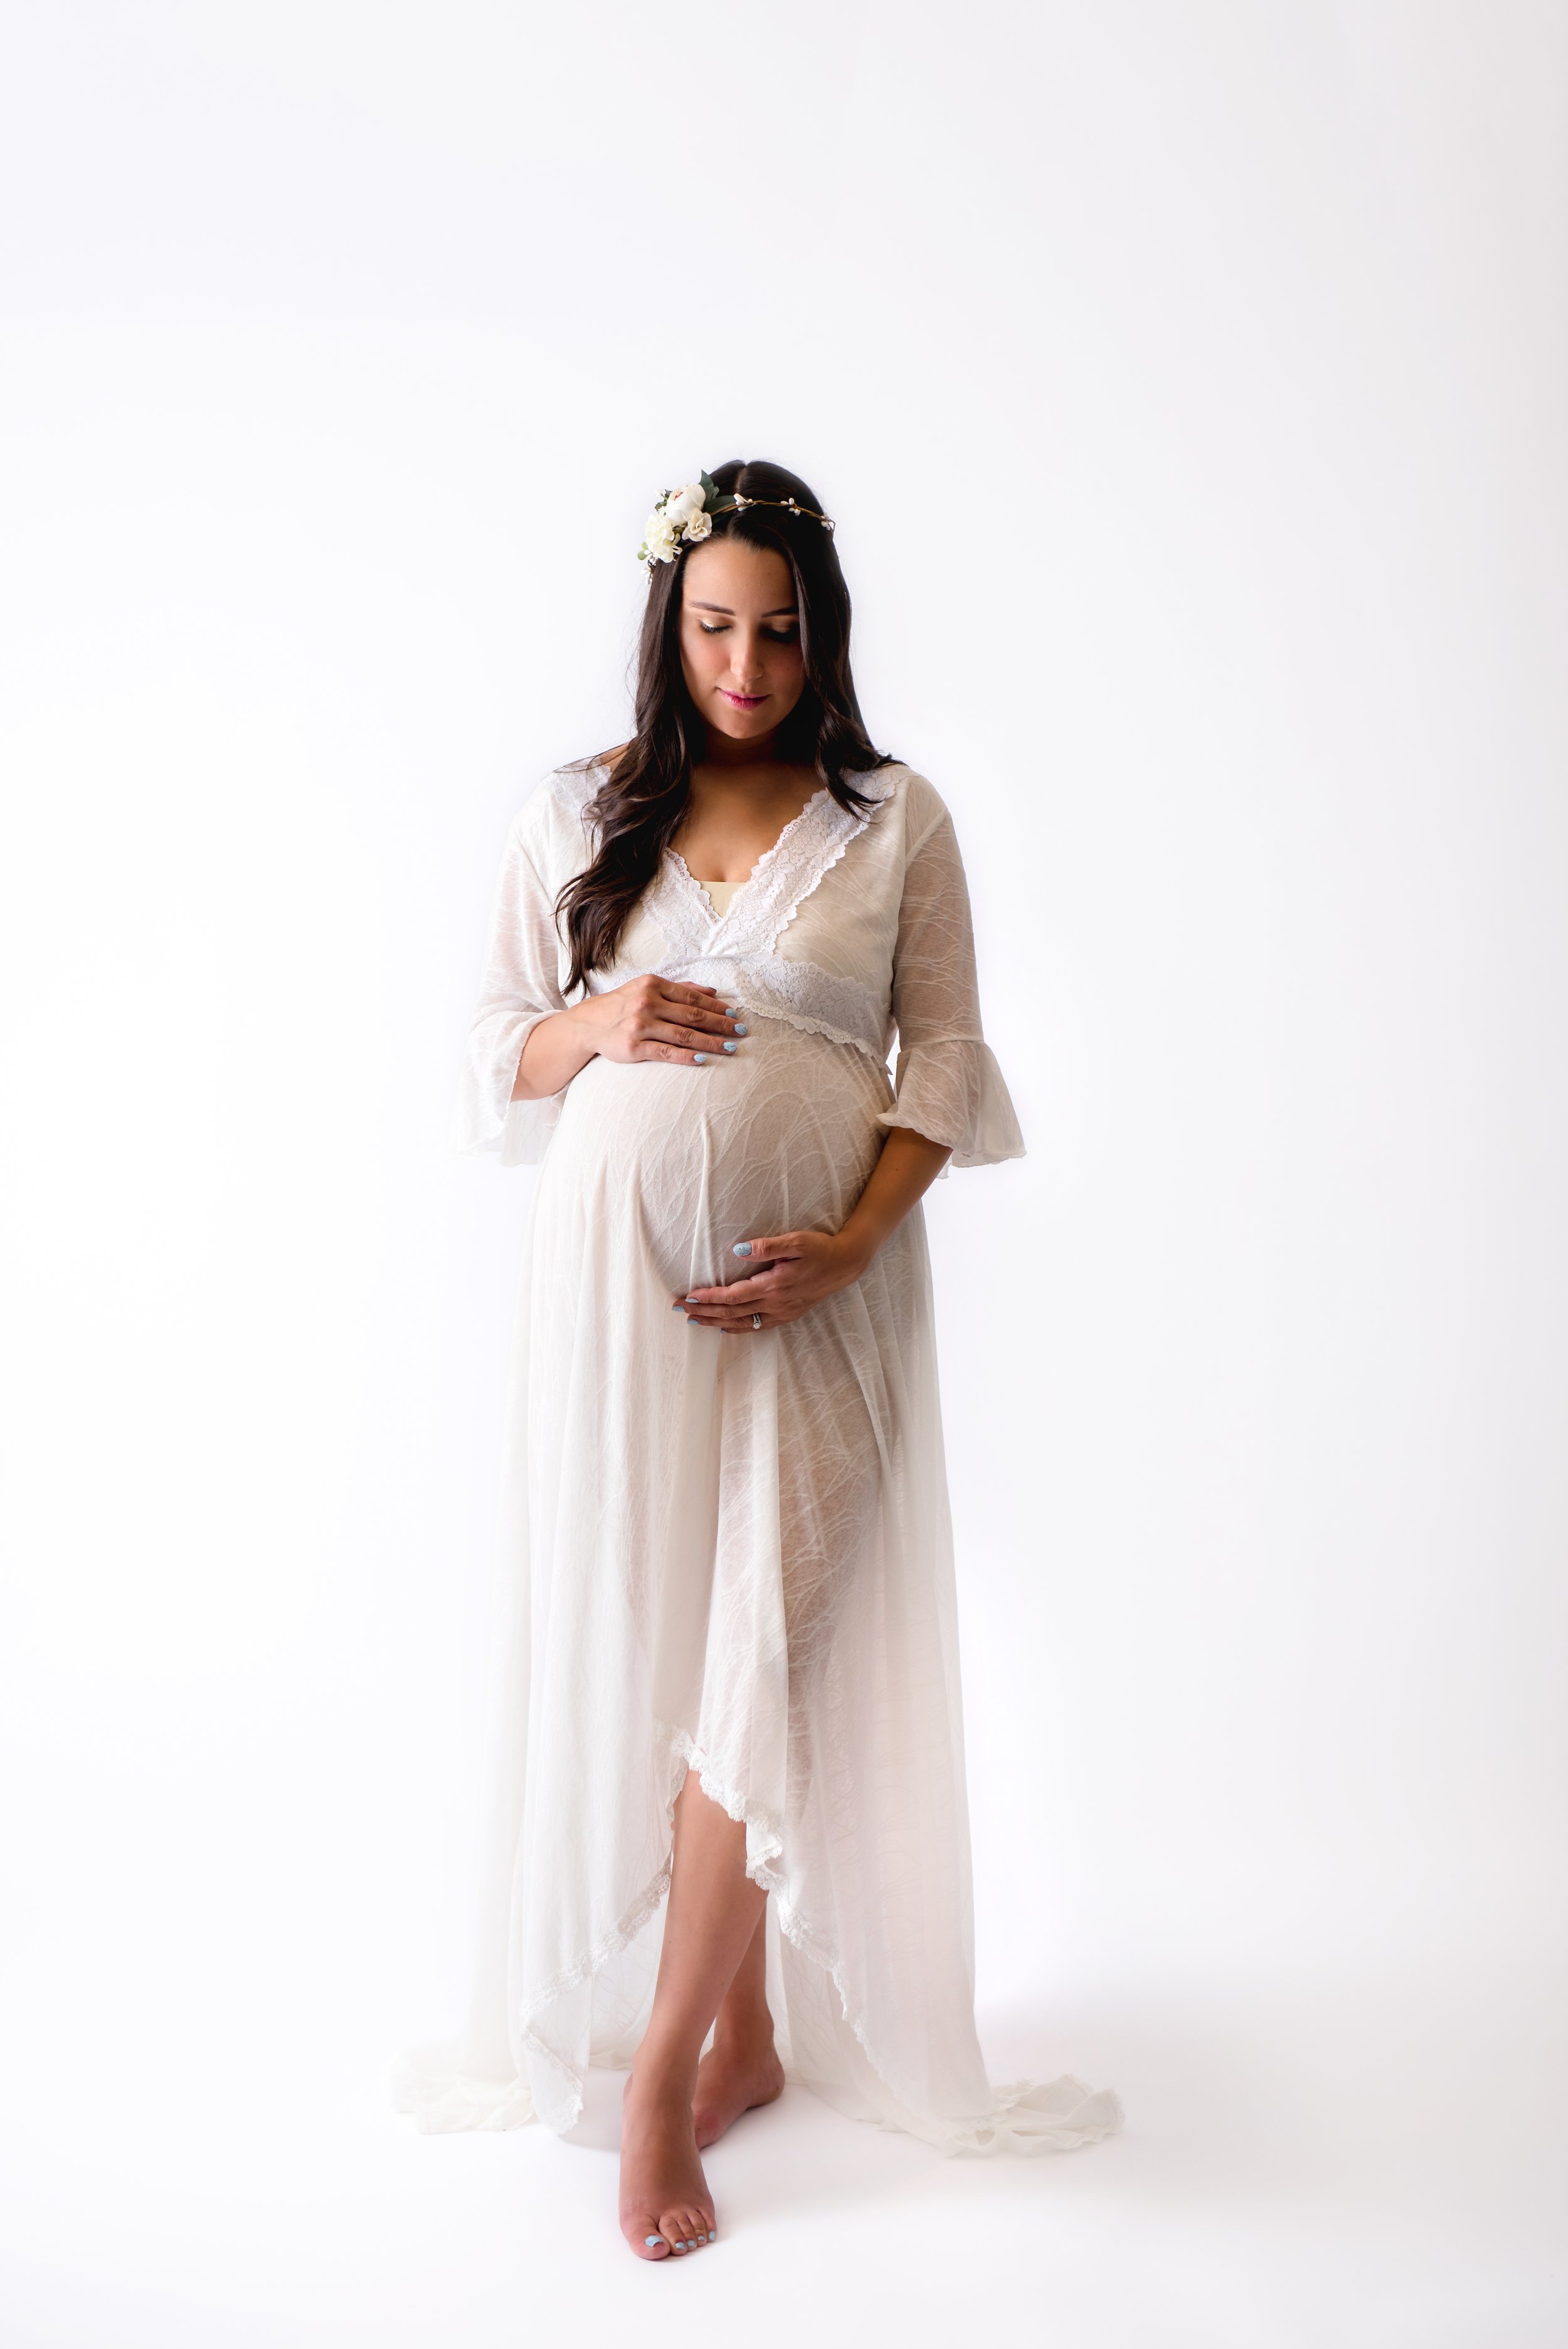 white dress front maternity photography in san antonio